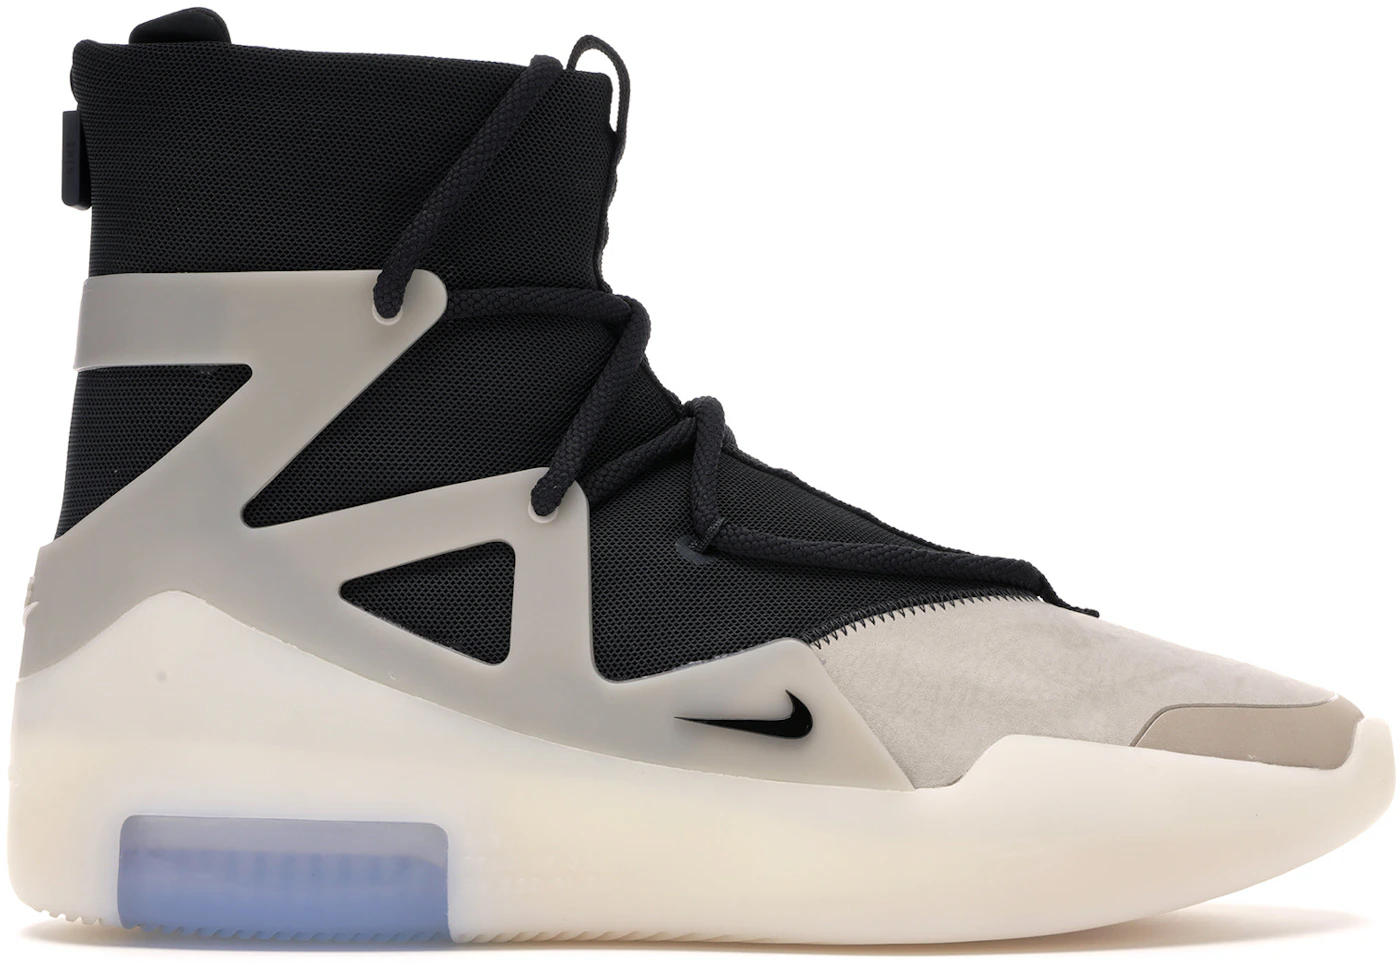 Nike Fear of God 1: How & Where to Buy